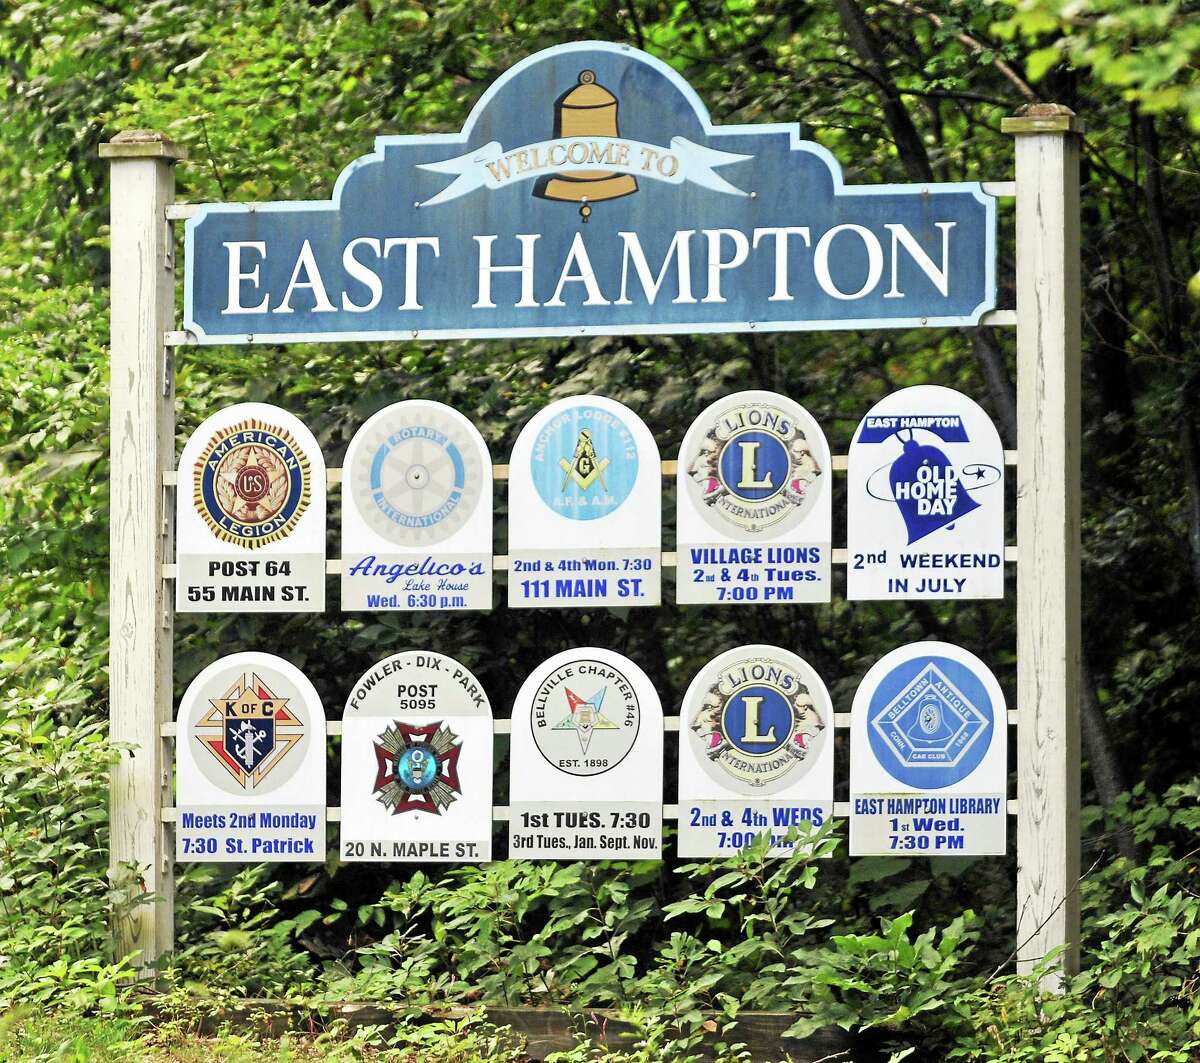 Catherine Avalone - The Middletown Press Town of East Hampton